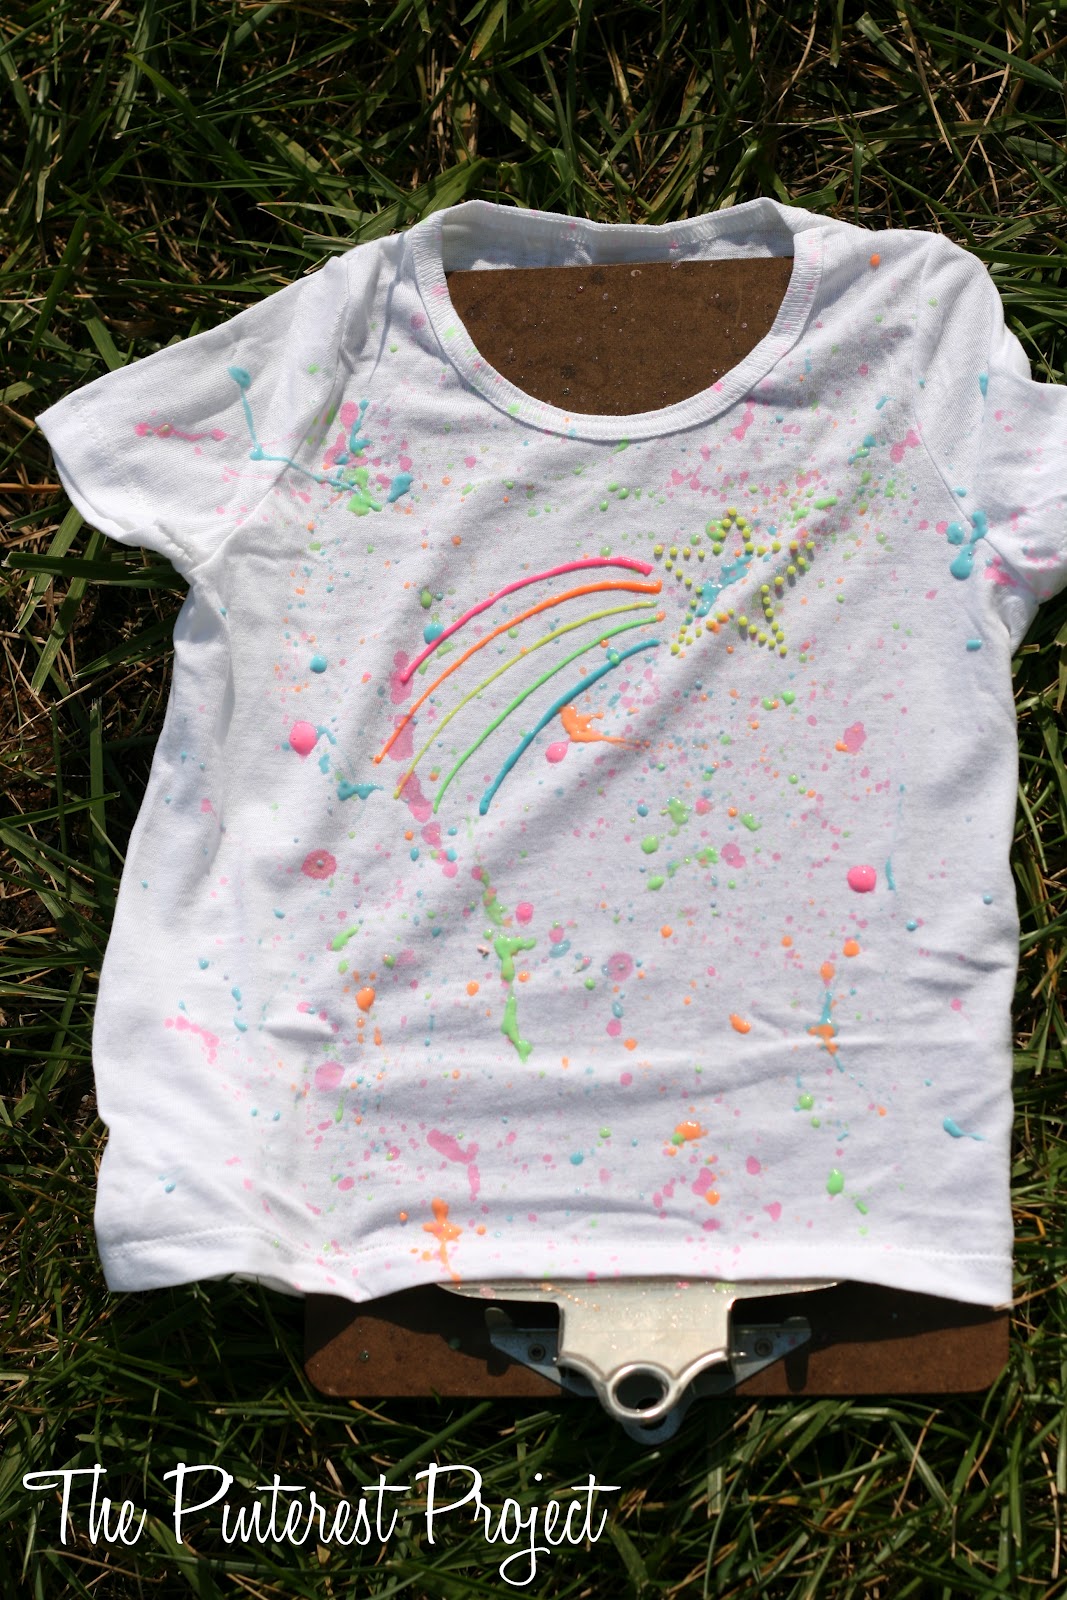 Make Your Own Puffy Paint Shirt